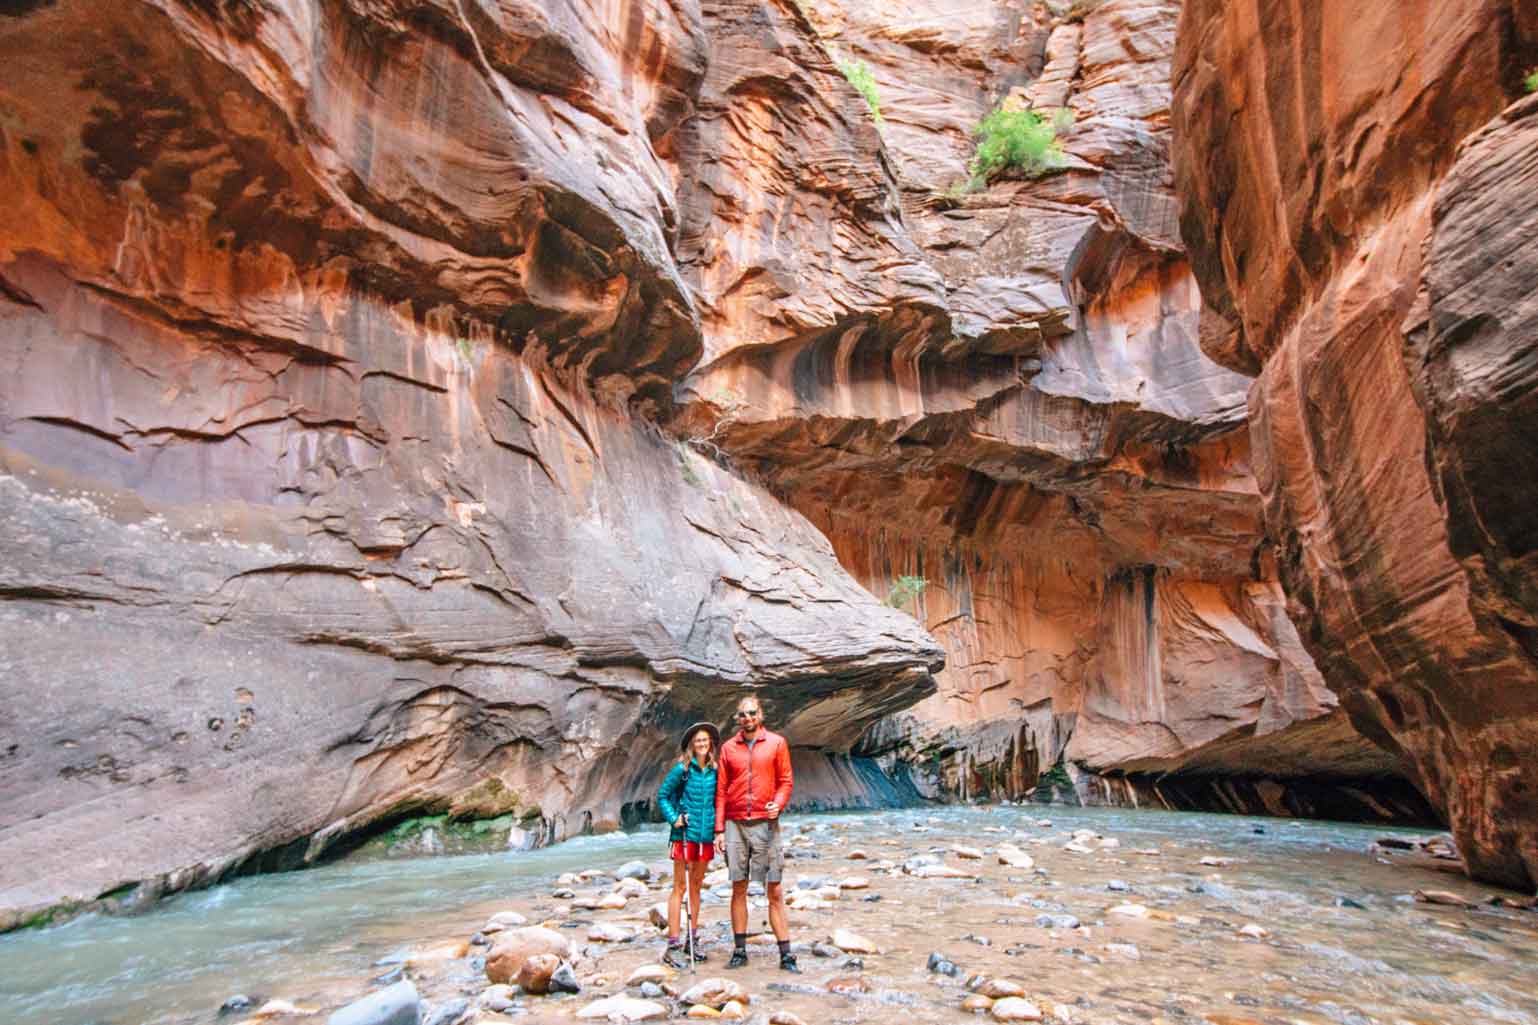 The Complete Guide to Hiking the Narrows in Zion (Gear, Permits, Tips